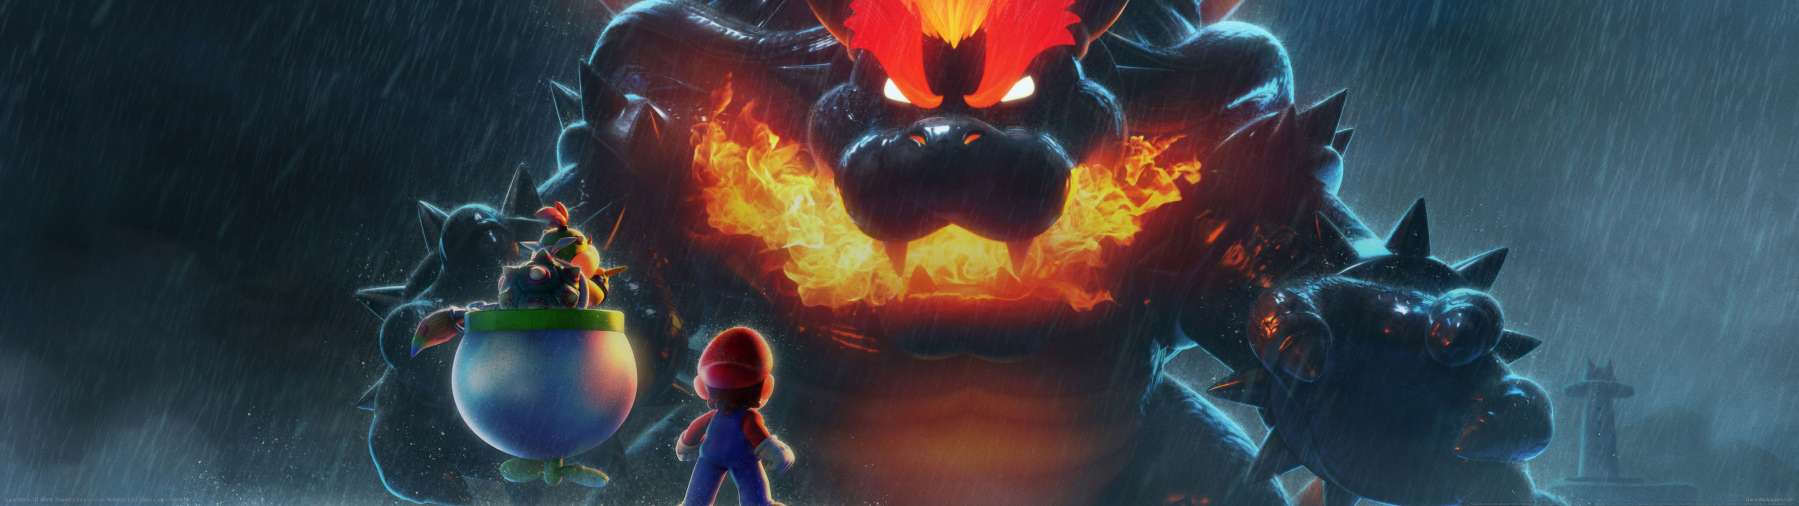 Super Mario 3D World: Bowser's Fury wallpaper or background